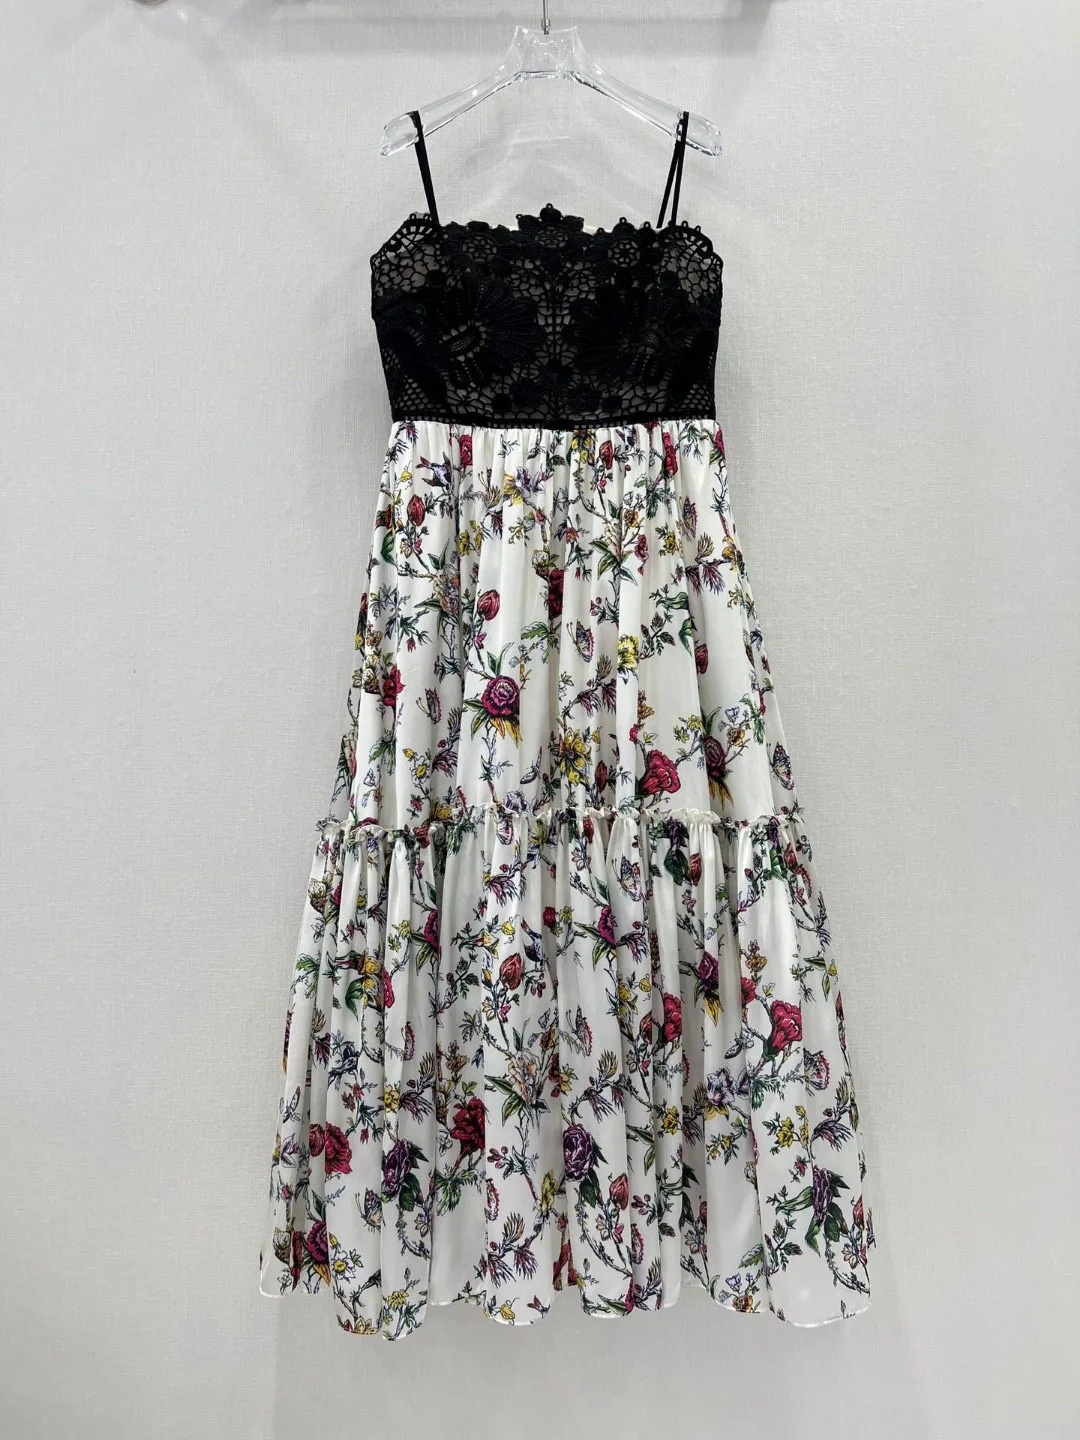 2023 spring and summer women's clothing fashion new Patchwork Embroidered Strap Printed Flower Dress 0526